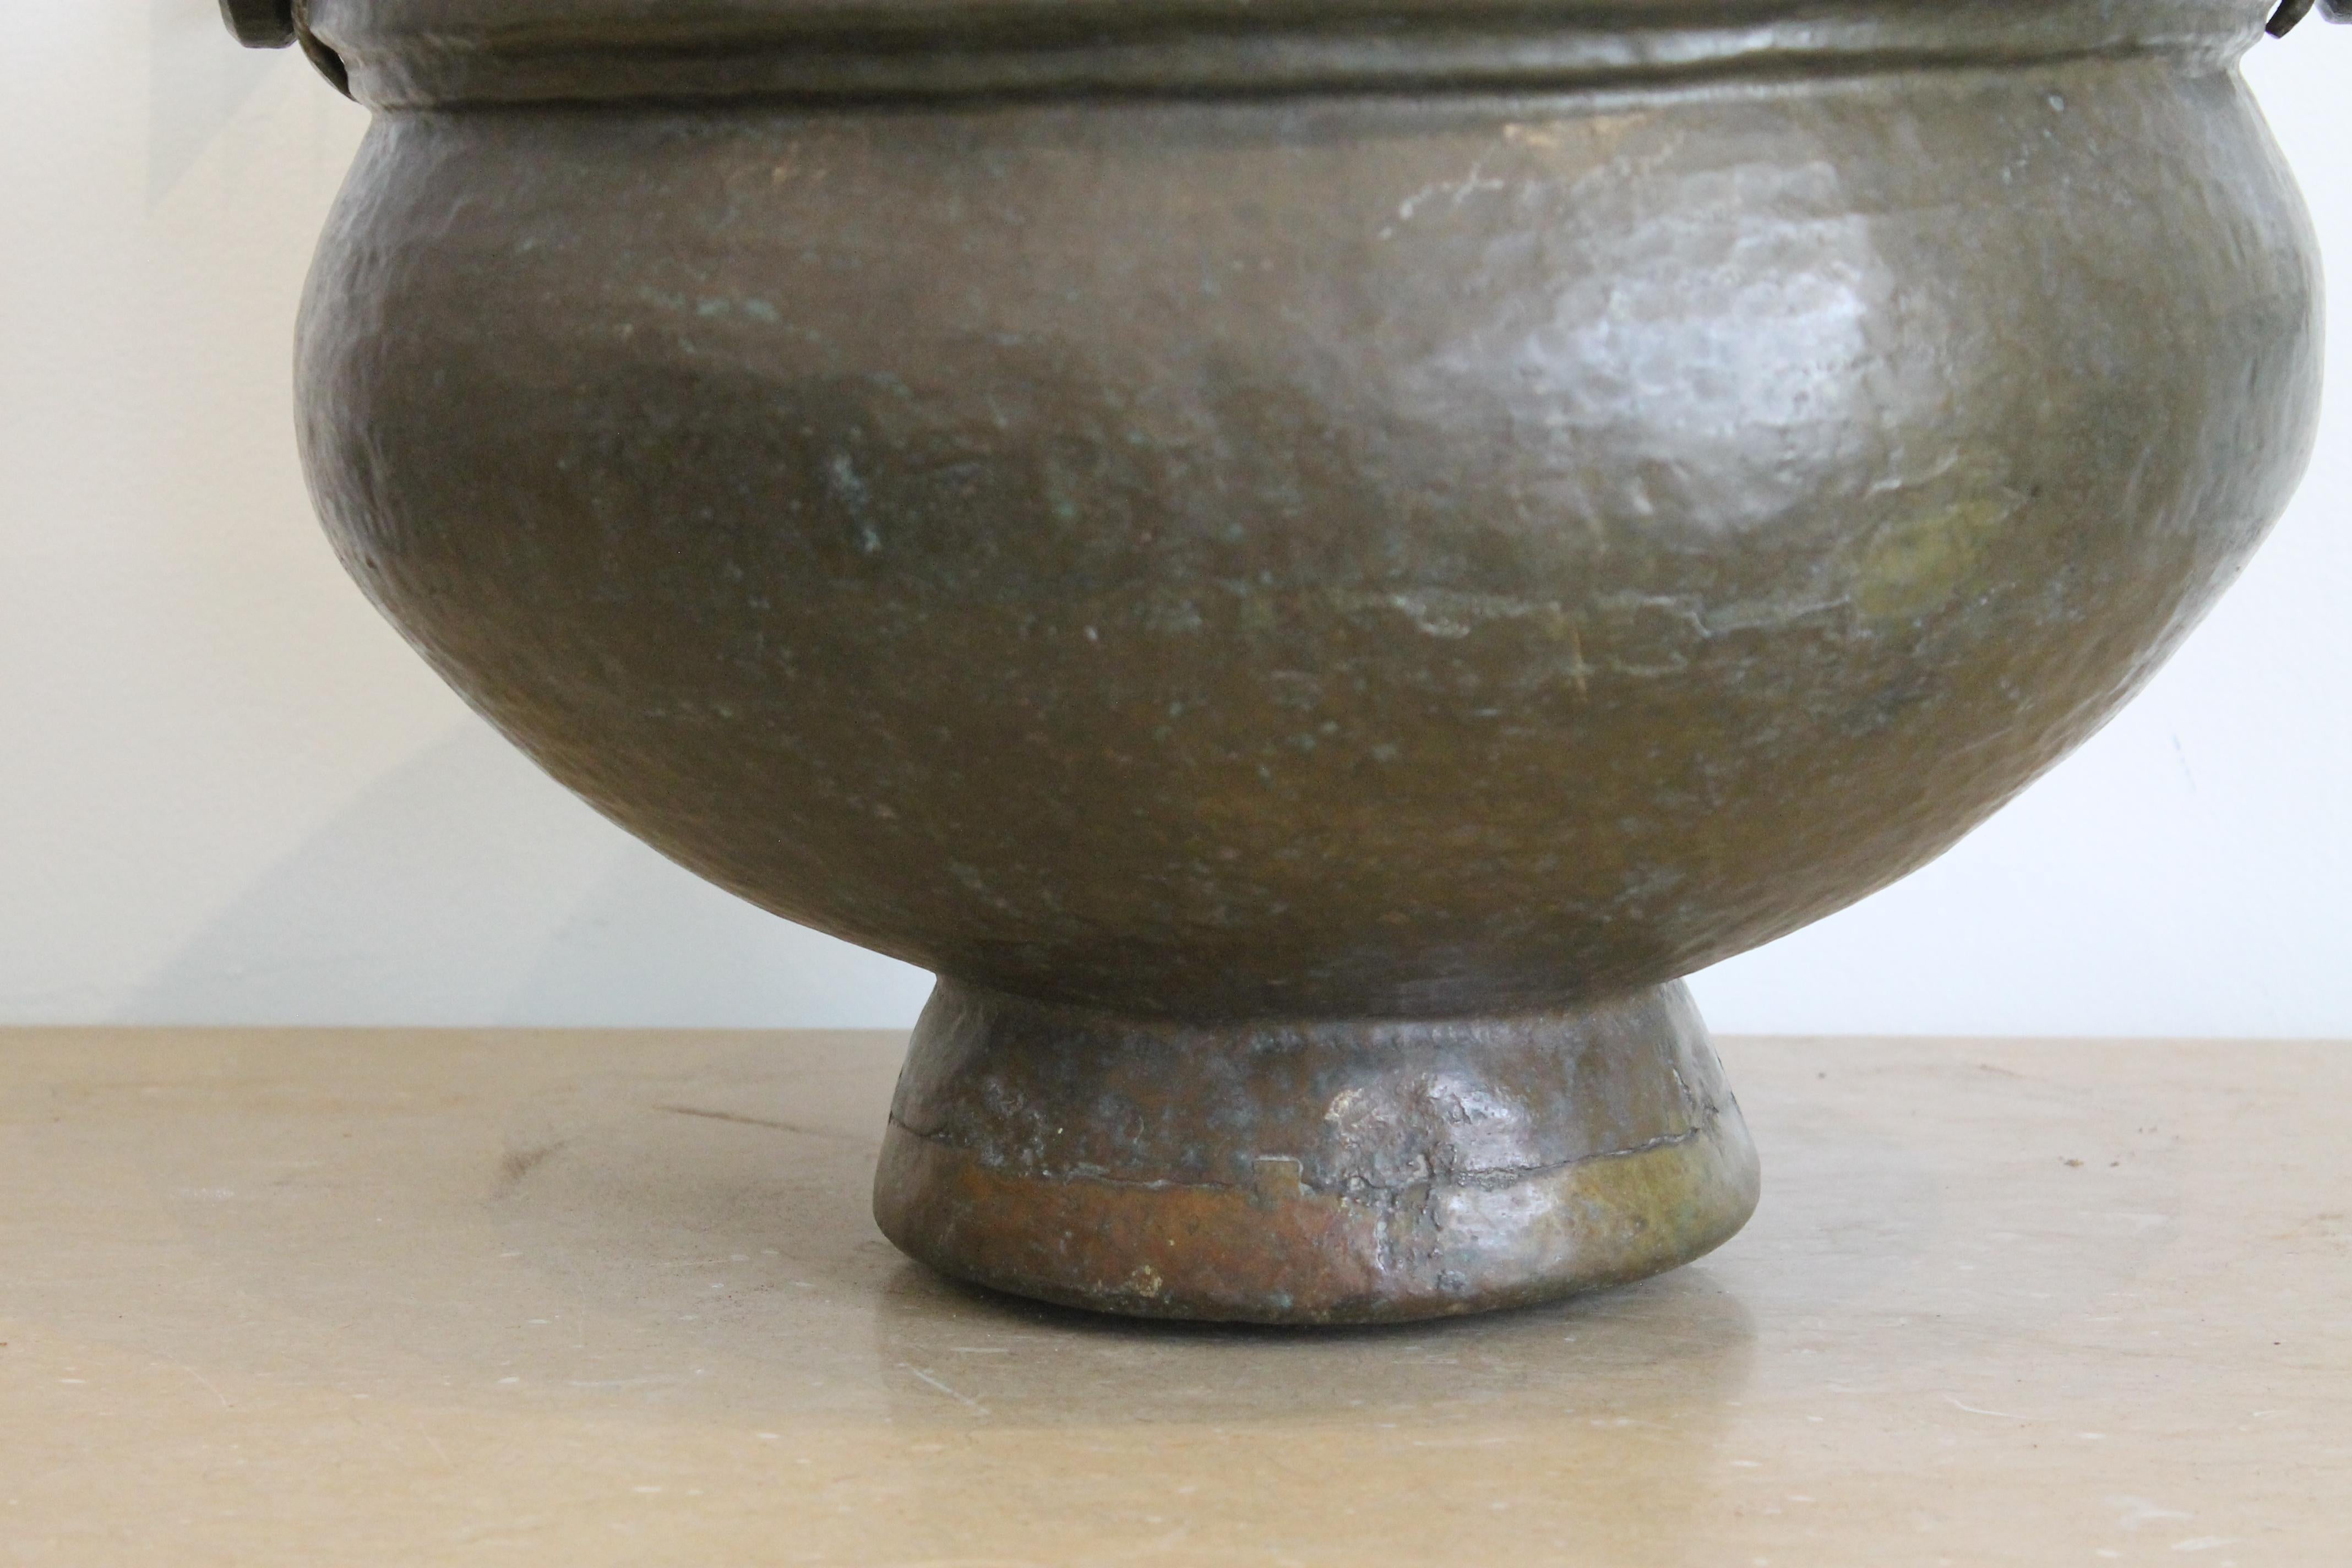 A large hammered brass pot with forged brass ring handles, and dove-tail type construction at the base. Two stamped markings are done in the English manner, both incomplete and illegible. Heavy gauge brass with old patina. Pot measures 13.5